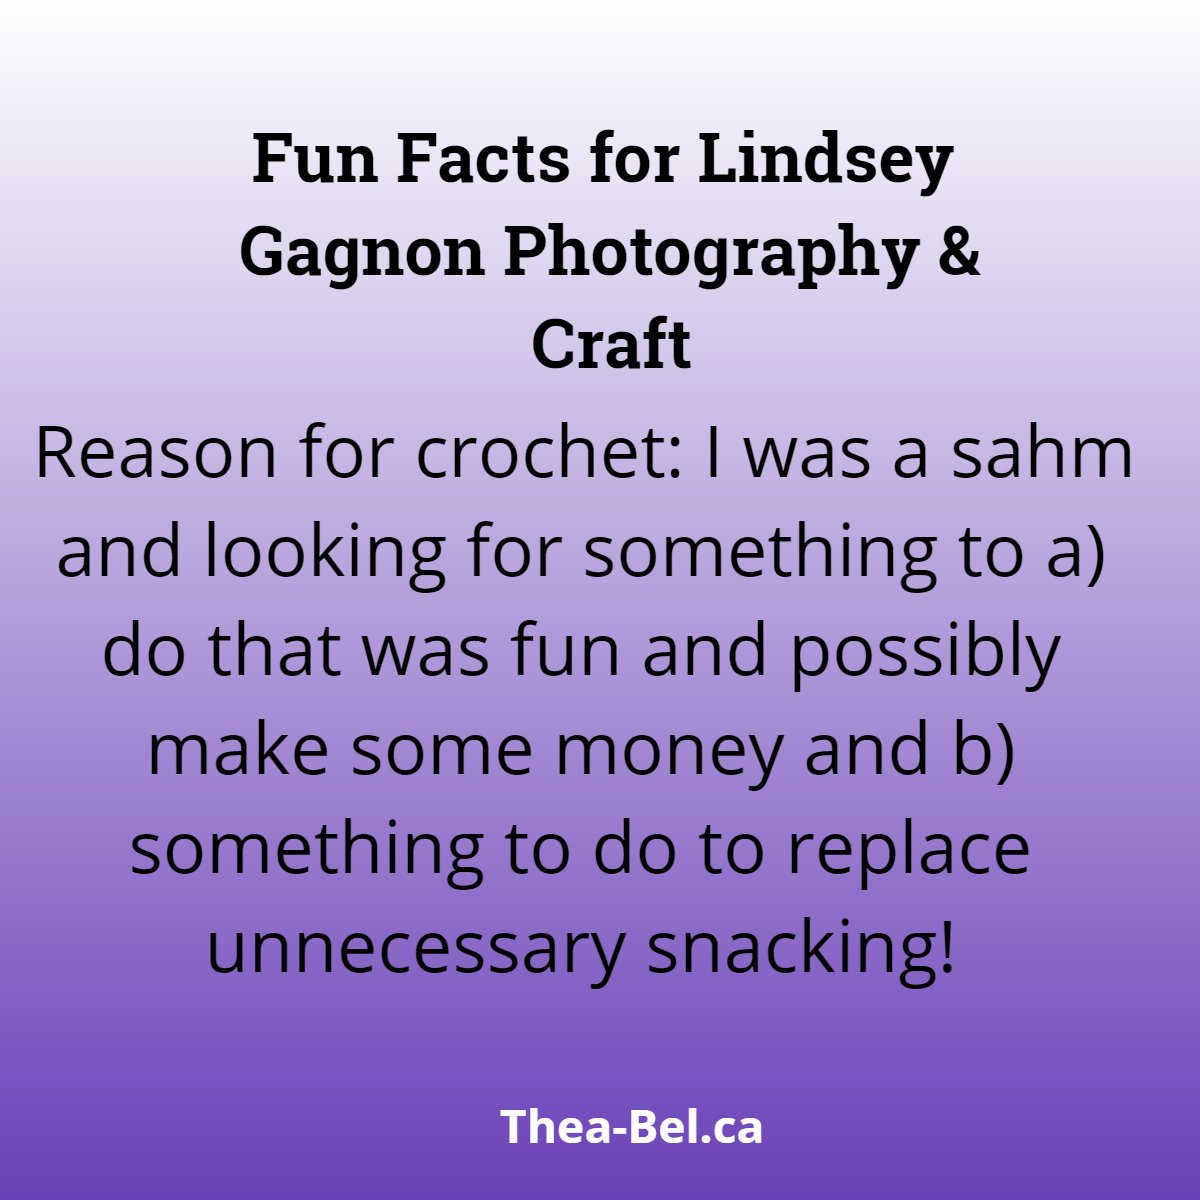 For those who #crochet, what are your reasons for doing it? ow.ly/R9Ae30lgoEq #funfact #reasonwhy #smallbusiness #handmade #whycrochet #crochetlove #businessmom #yyc #entrepreneur #canadacompany